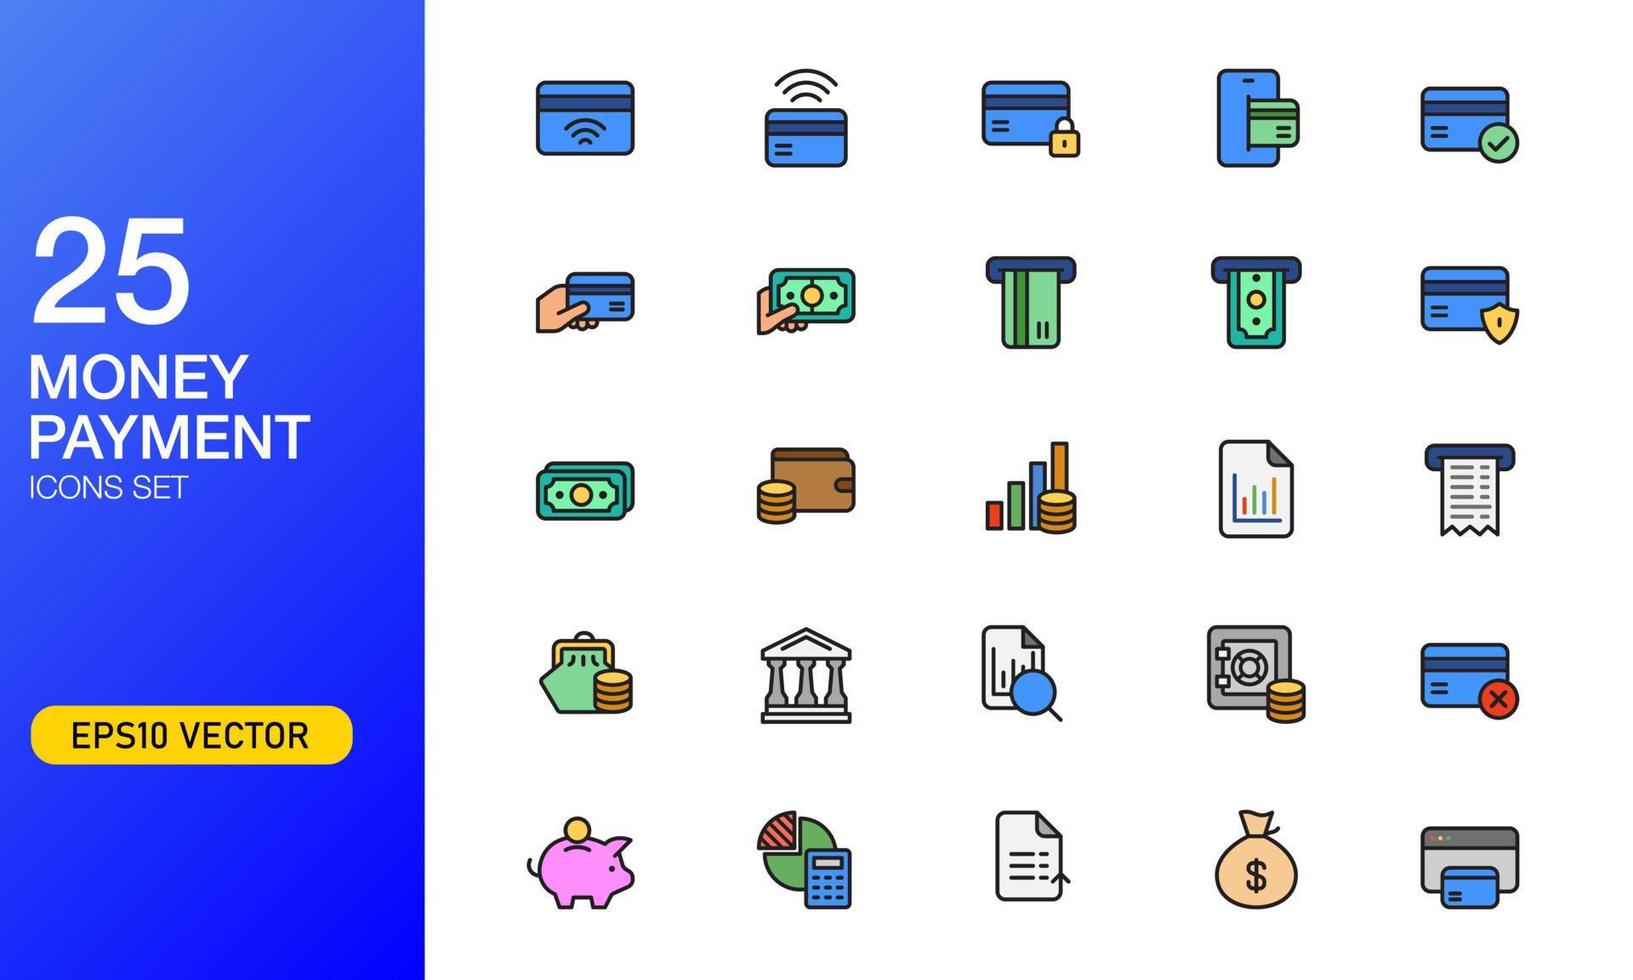 Money and online payment icon in fill outlined style. Suitable for design element of digital banking, online payment, and business finance app icon set. vector